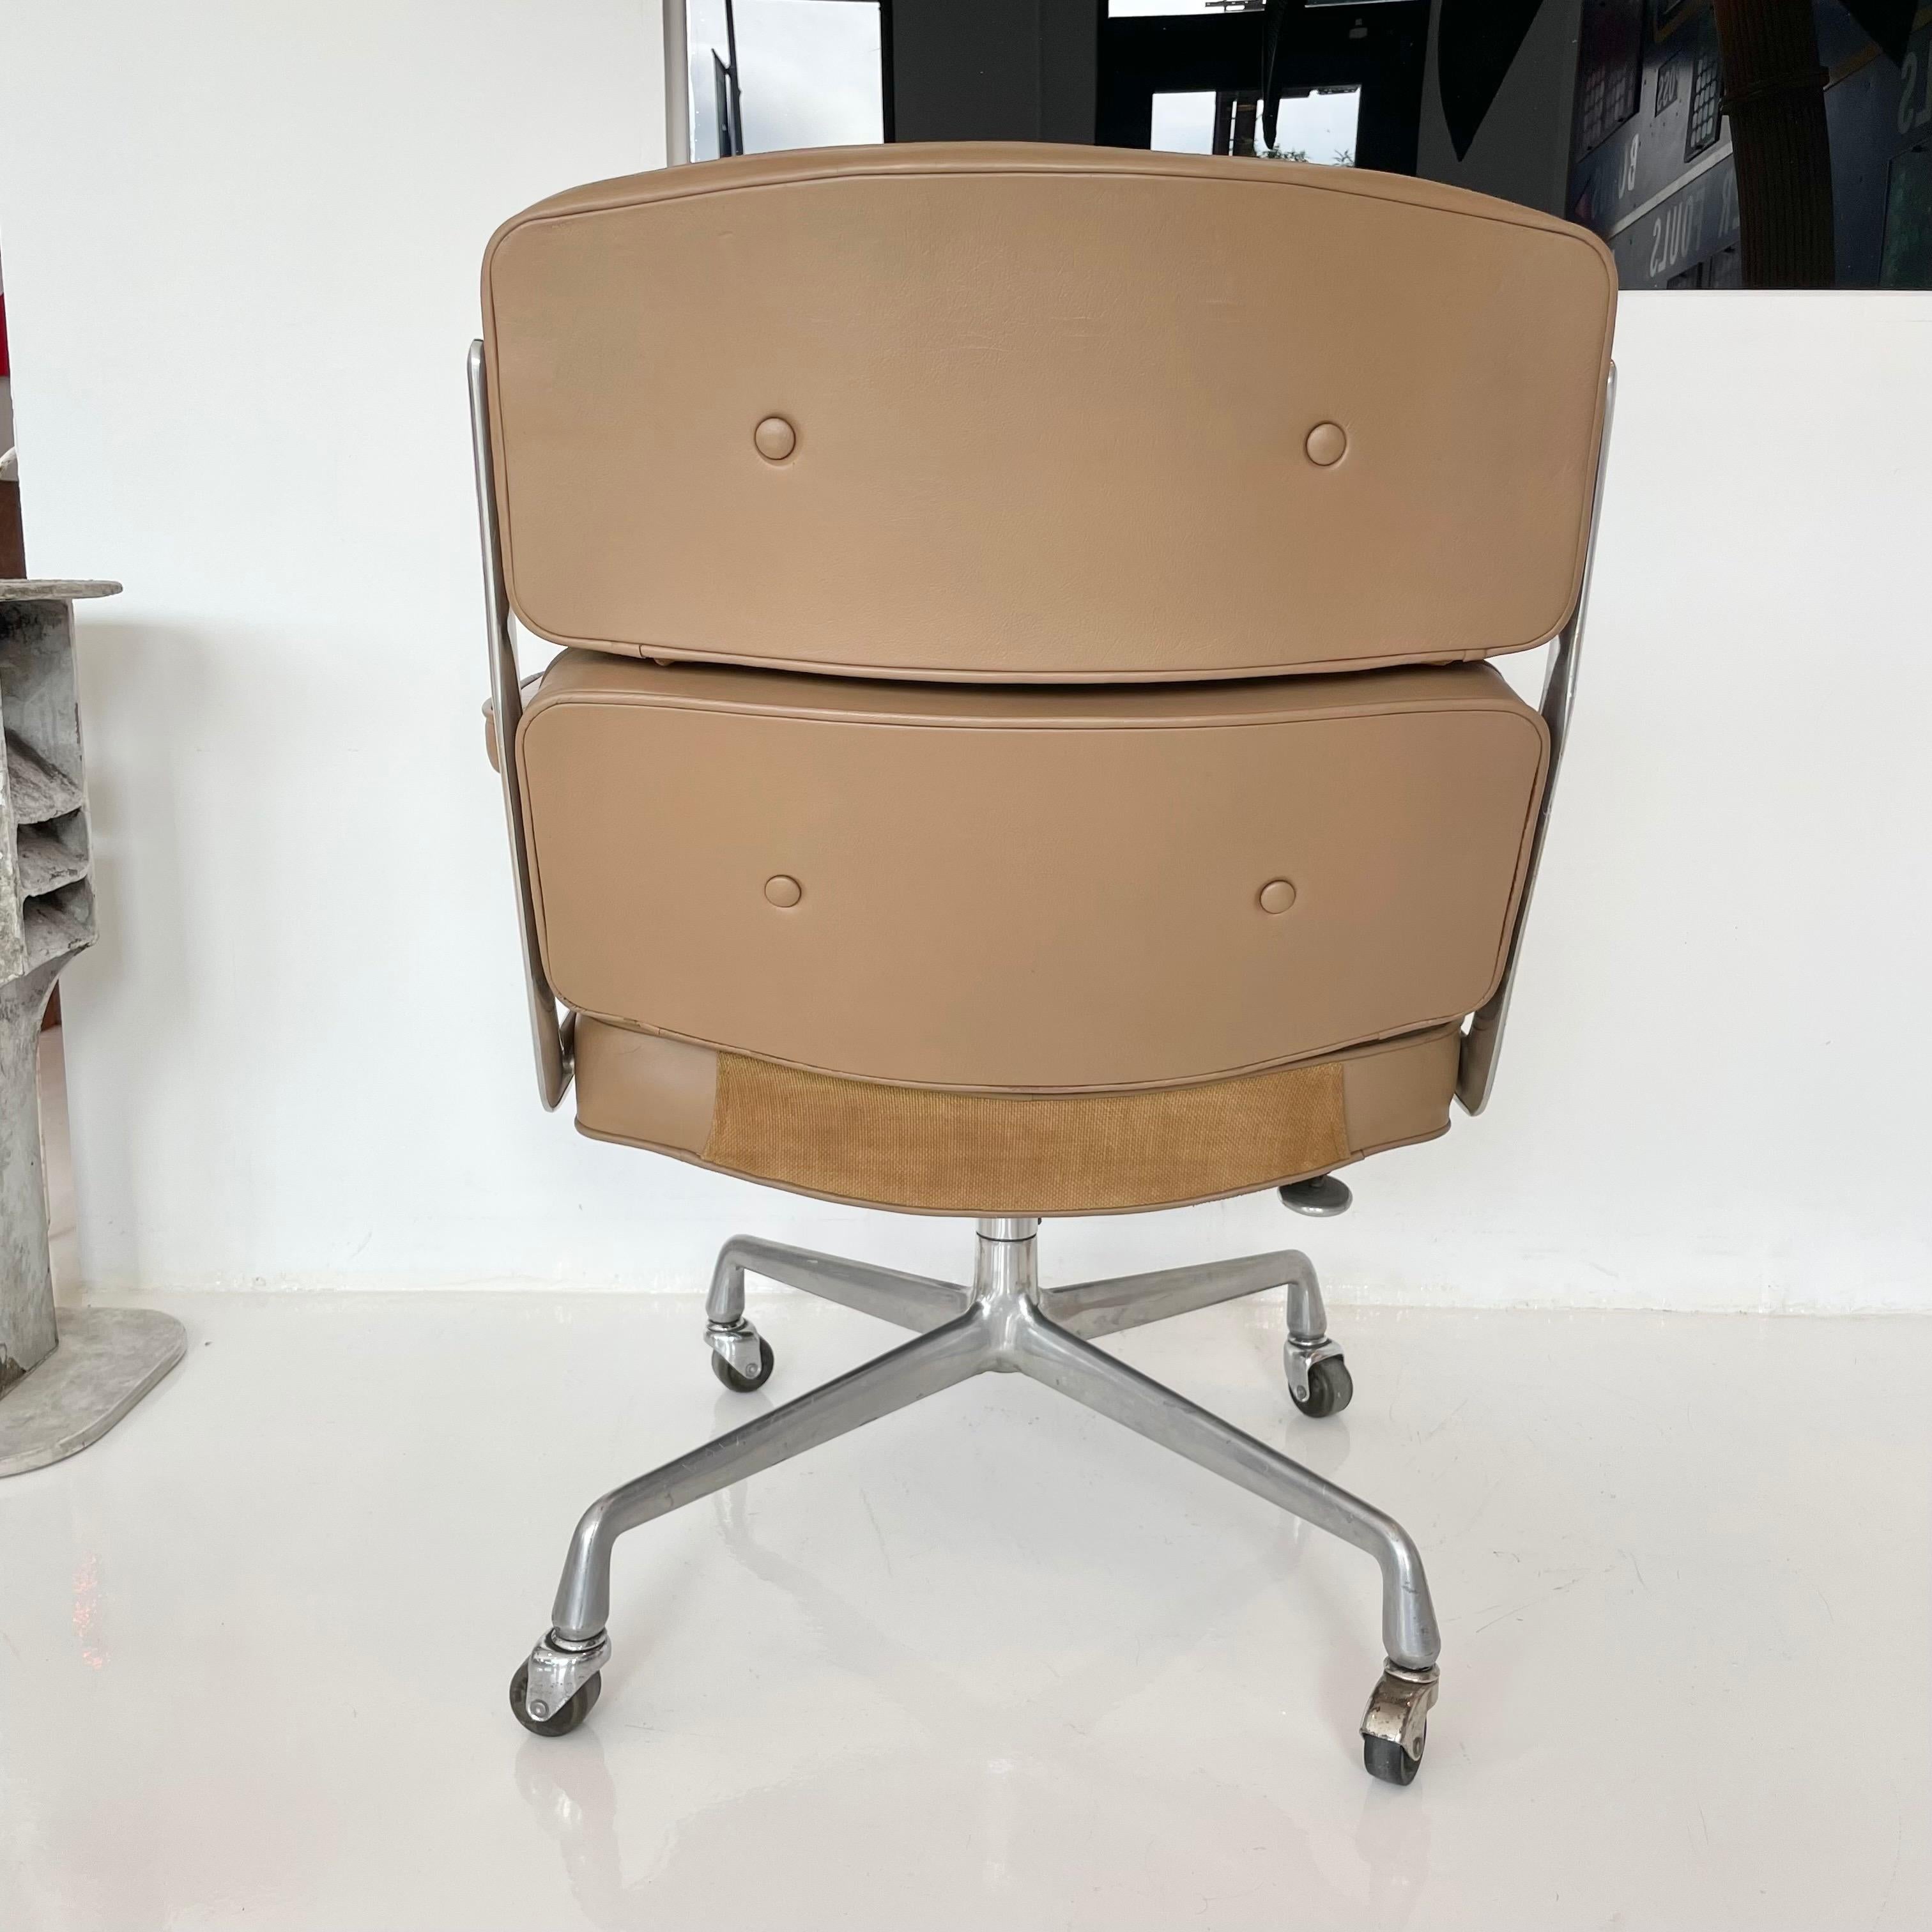 North American Original Eames Time Life Chair in Camel Leather